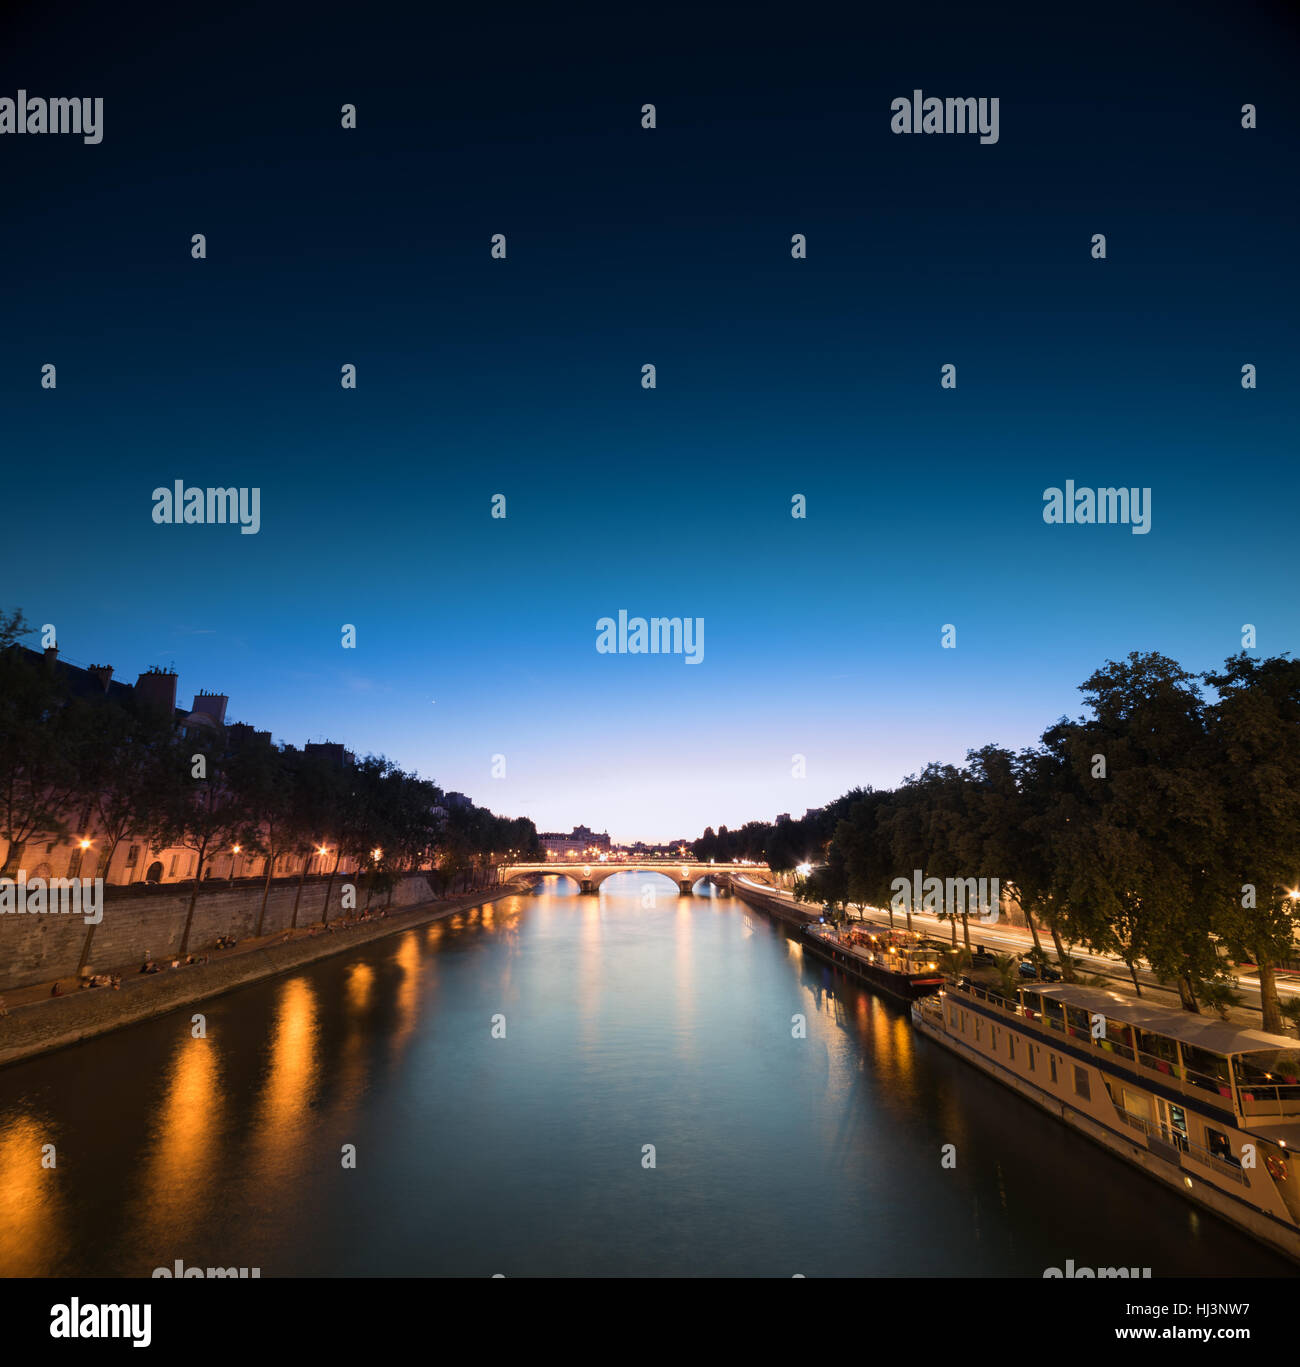 Seine river at night time, a view from a bridge Stock Photo